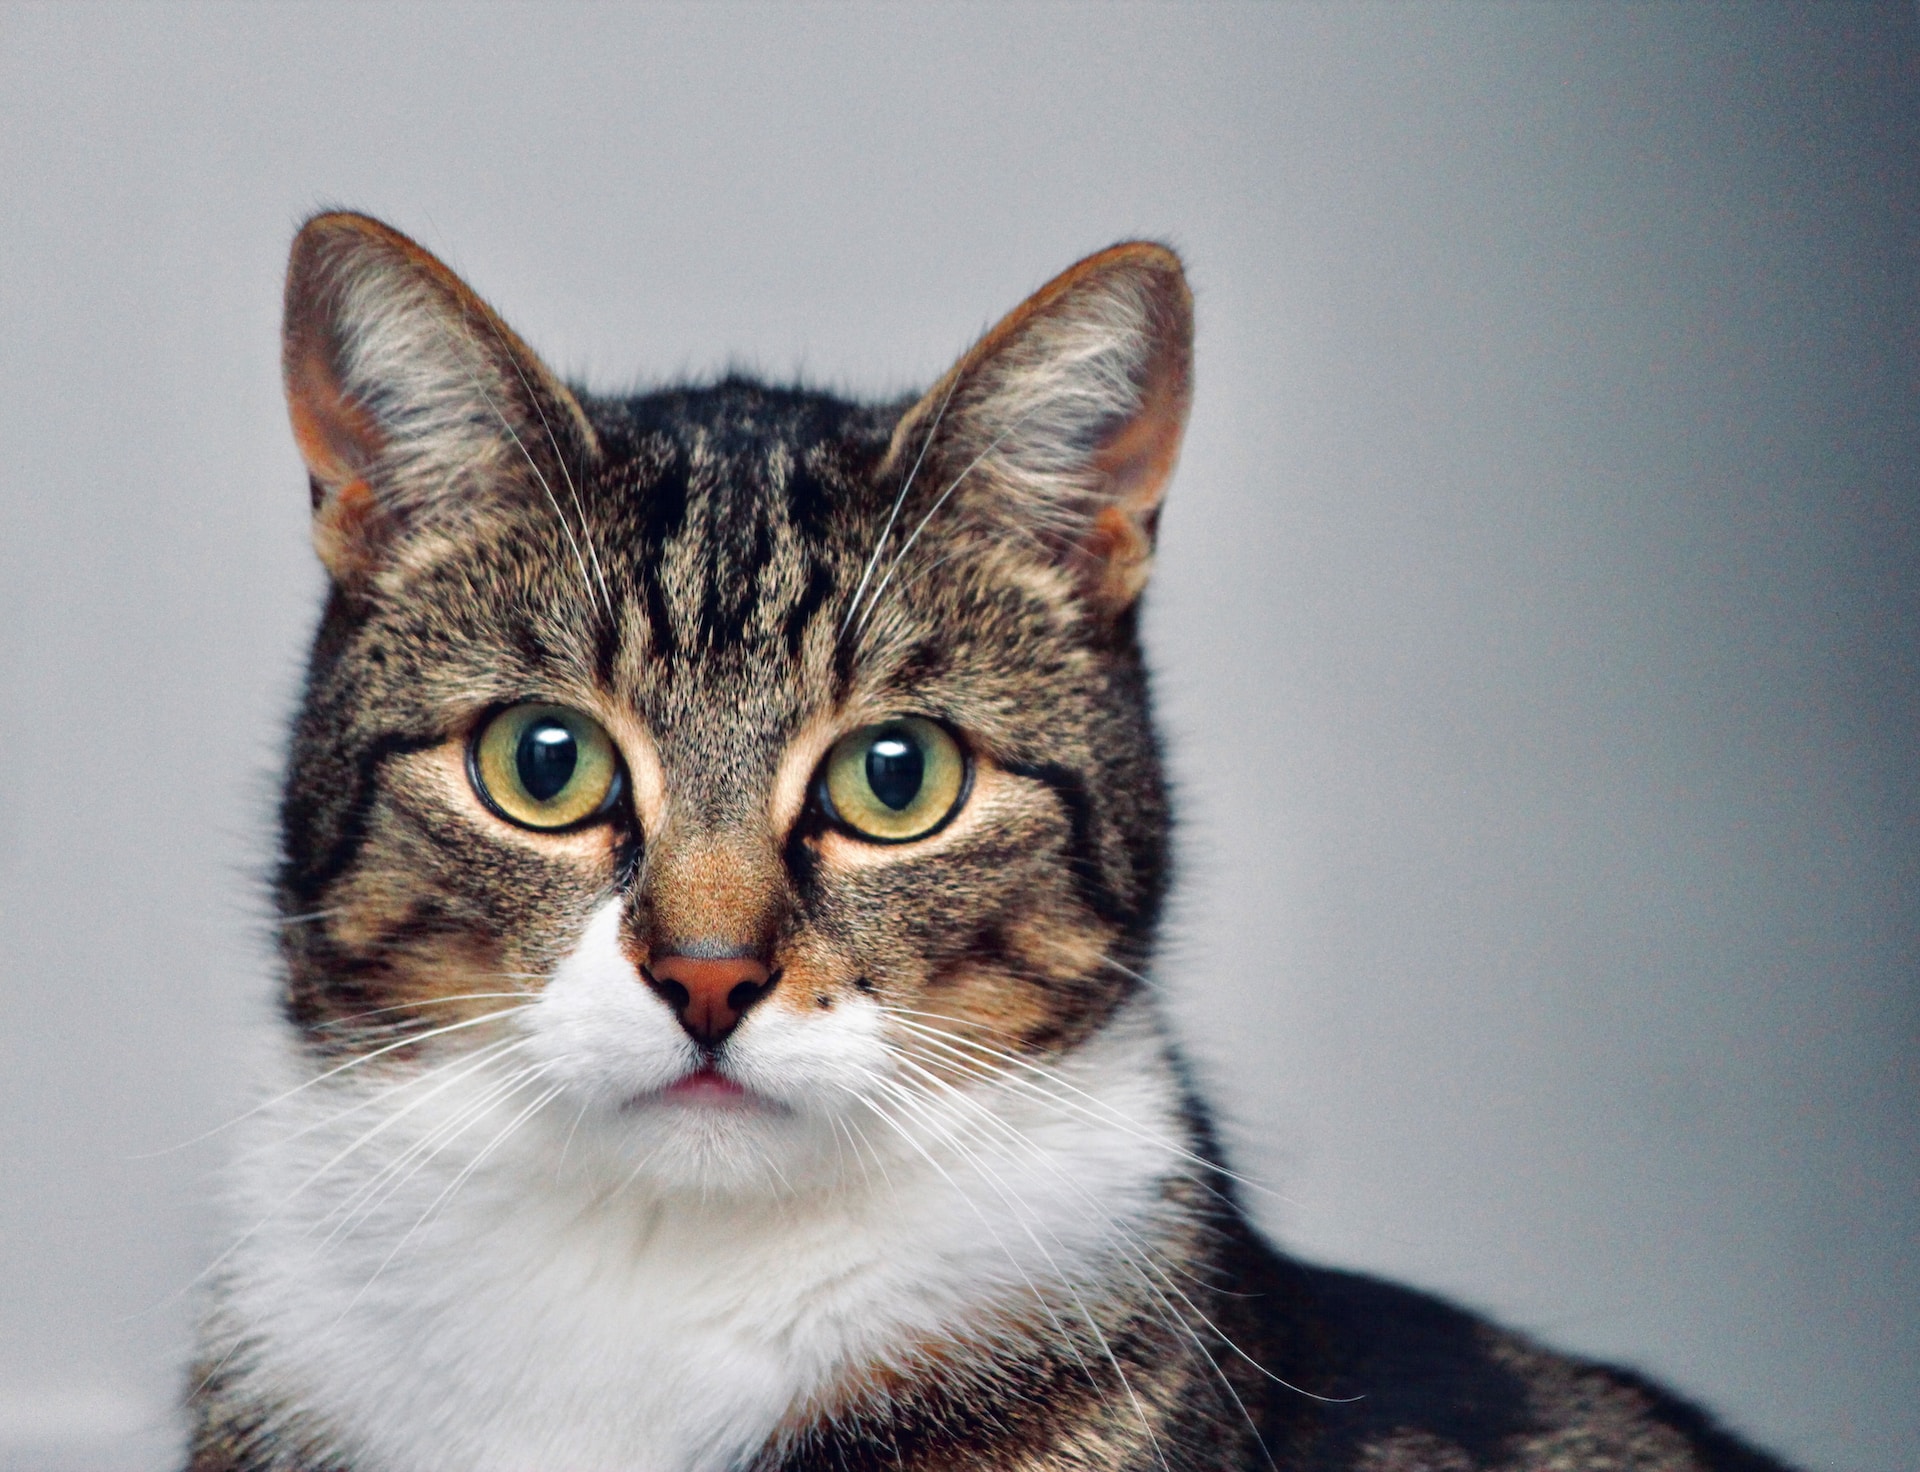 5 amazing facts you might not know about cats